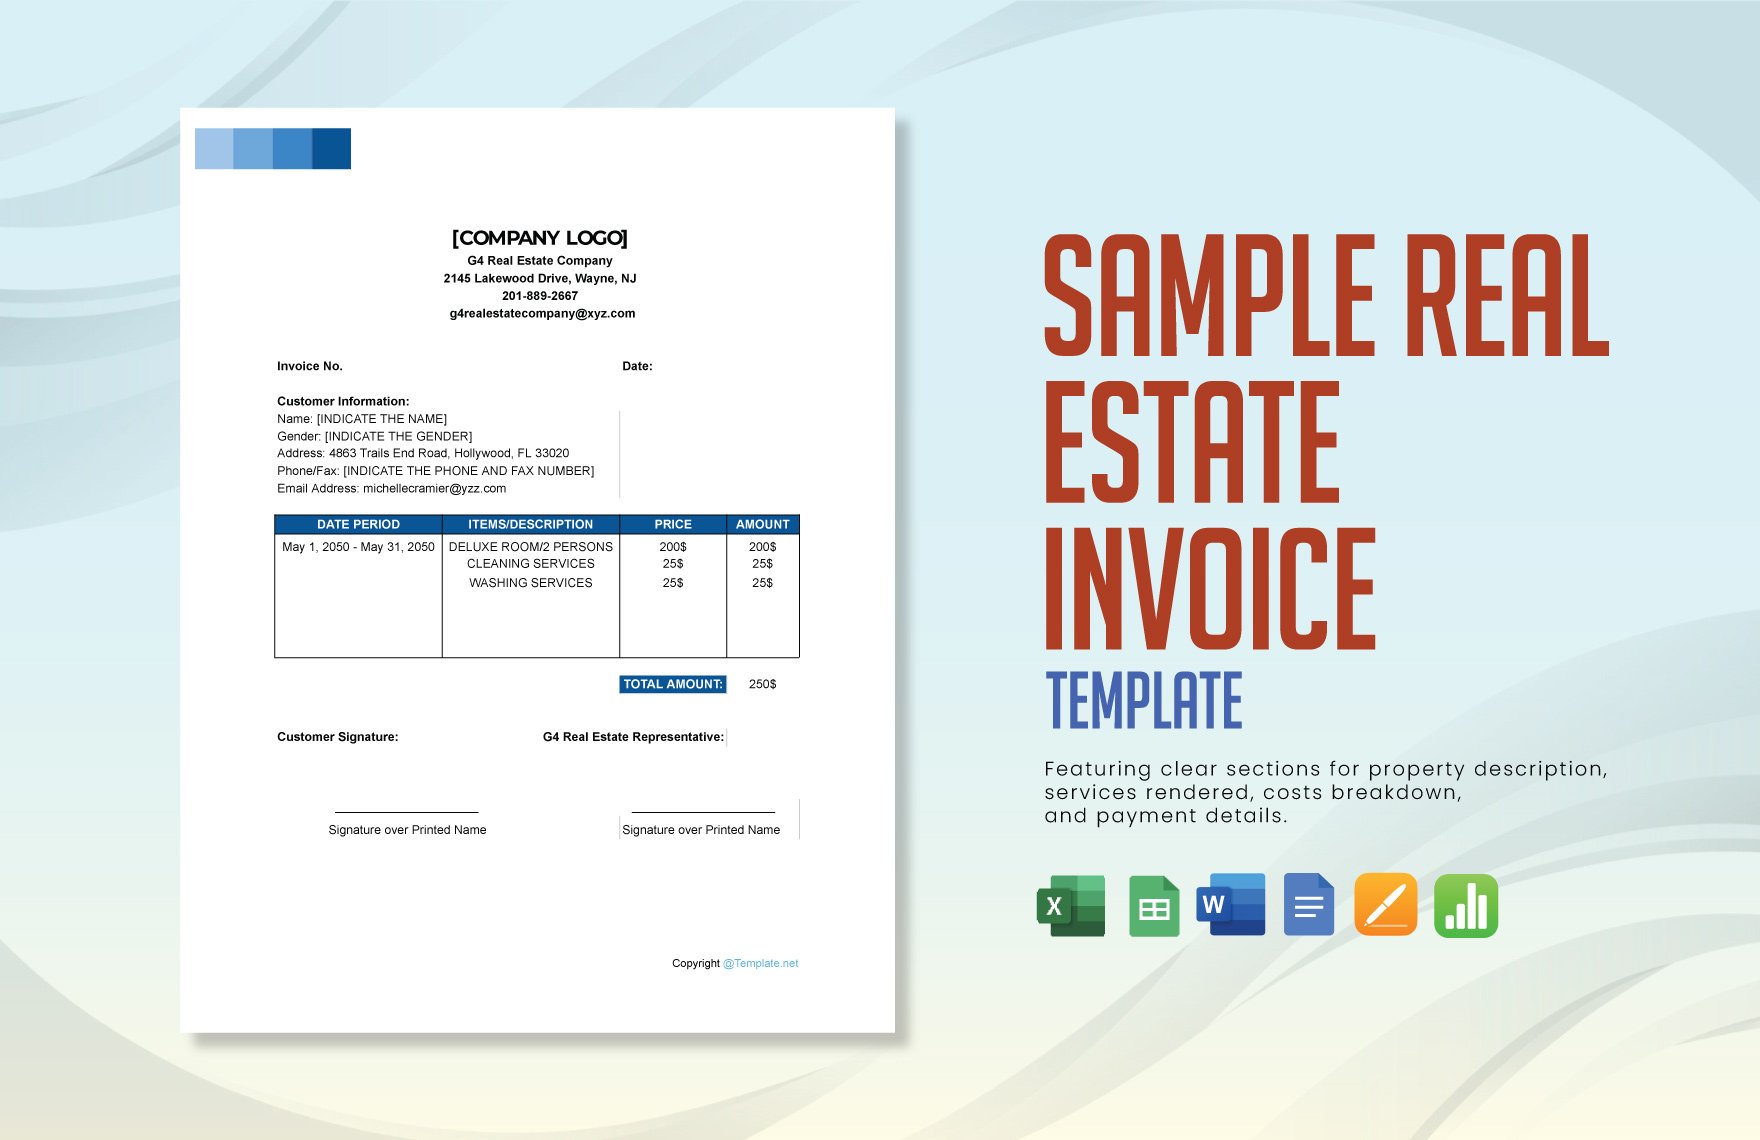 Sample Real Estate Invoice Template in Word, Google Docs, Excel, Google Sheets, Apple Pages, Apple Numbers